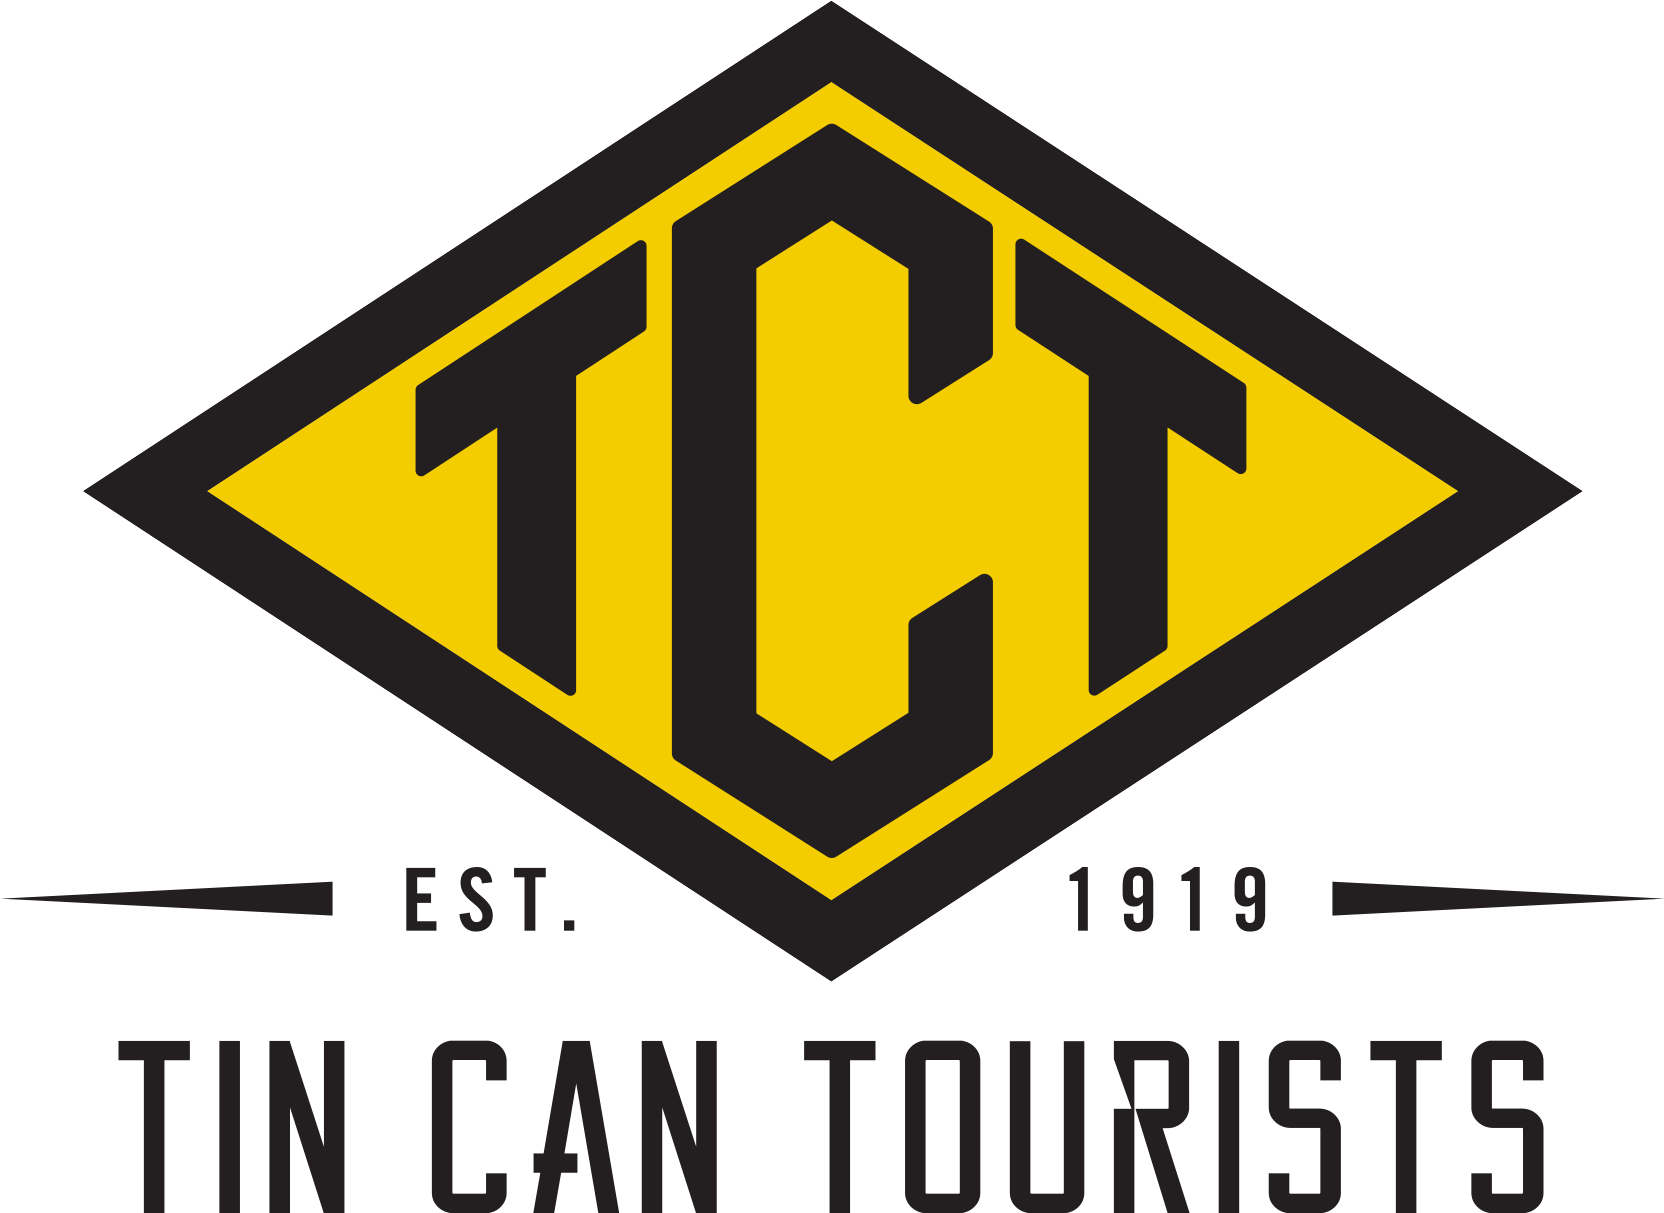 High Resolution Pictures For Marketing - Tin Can Tourist (1800x1350)